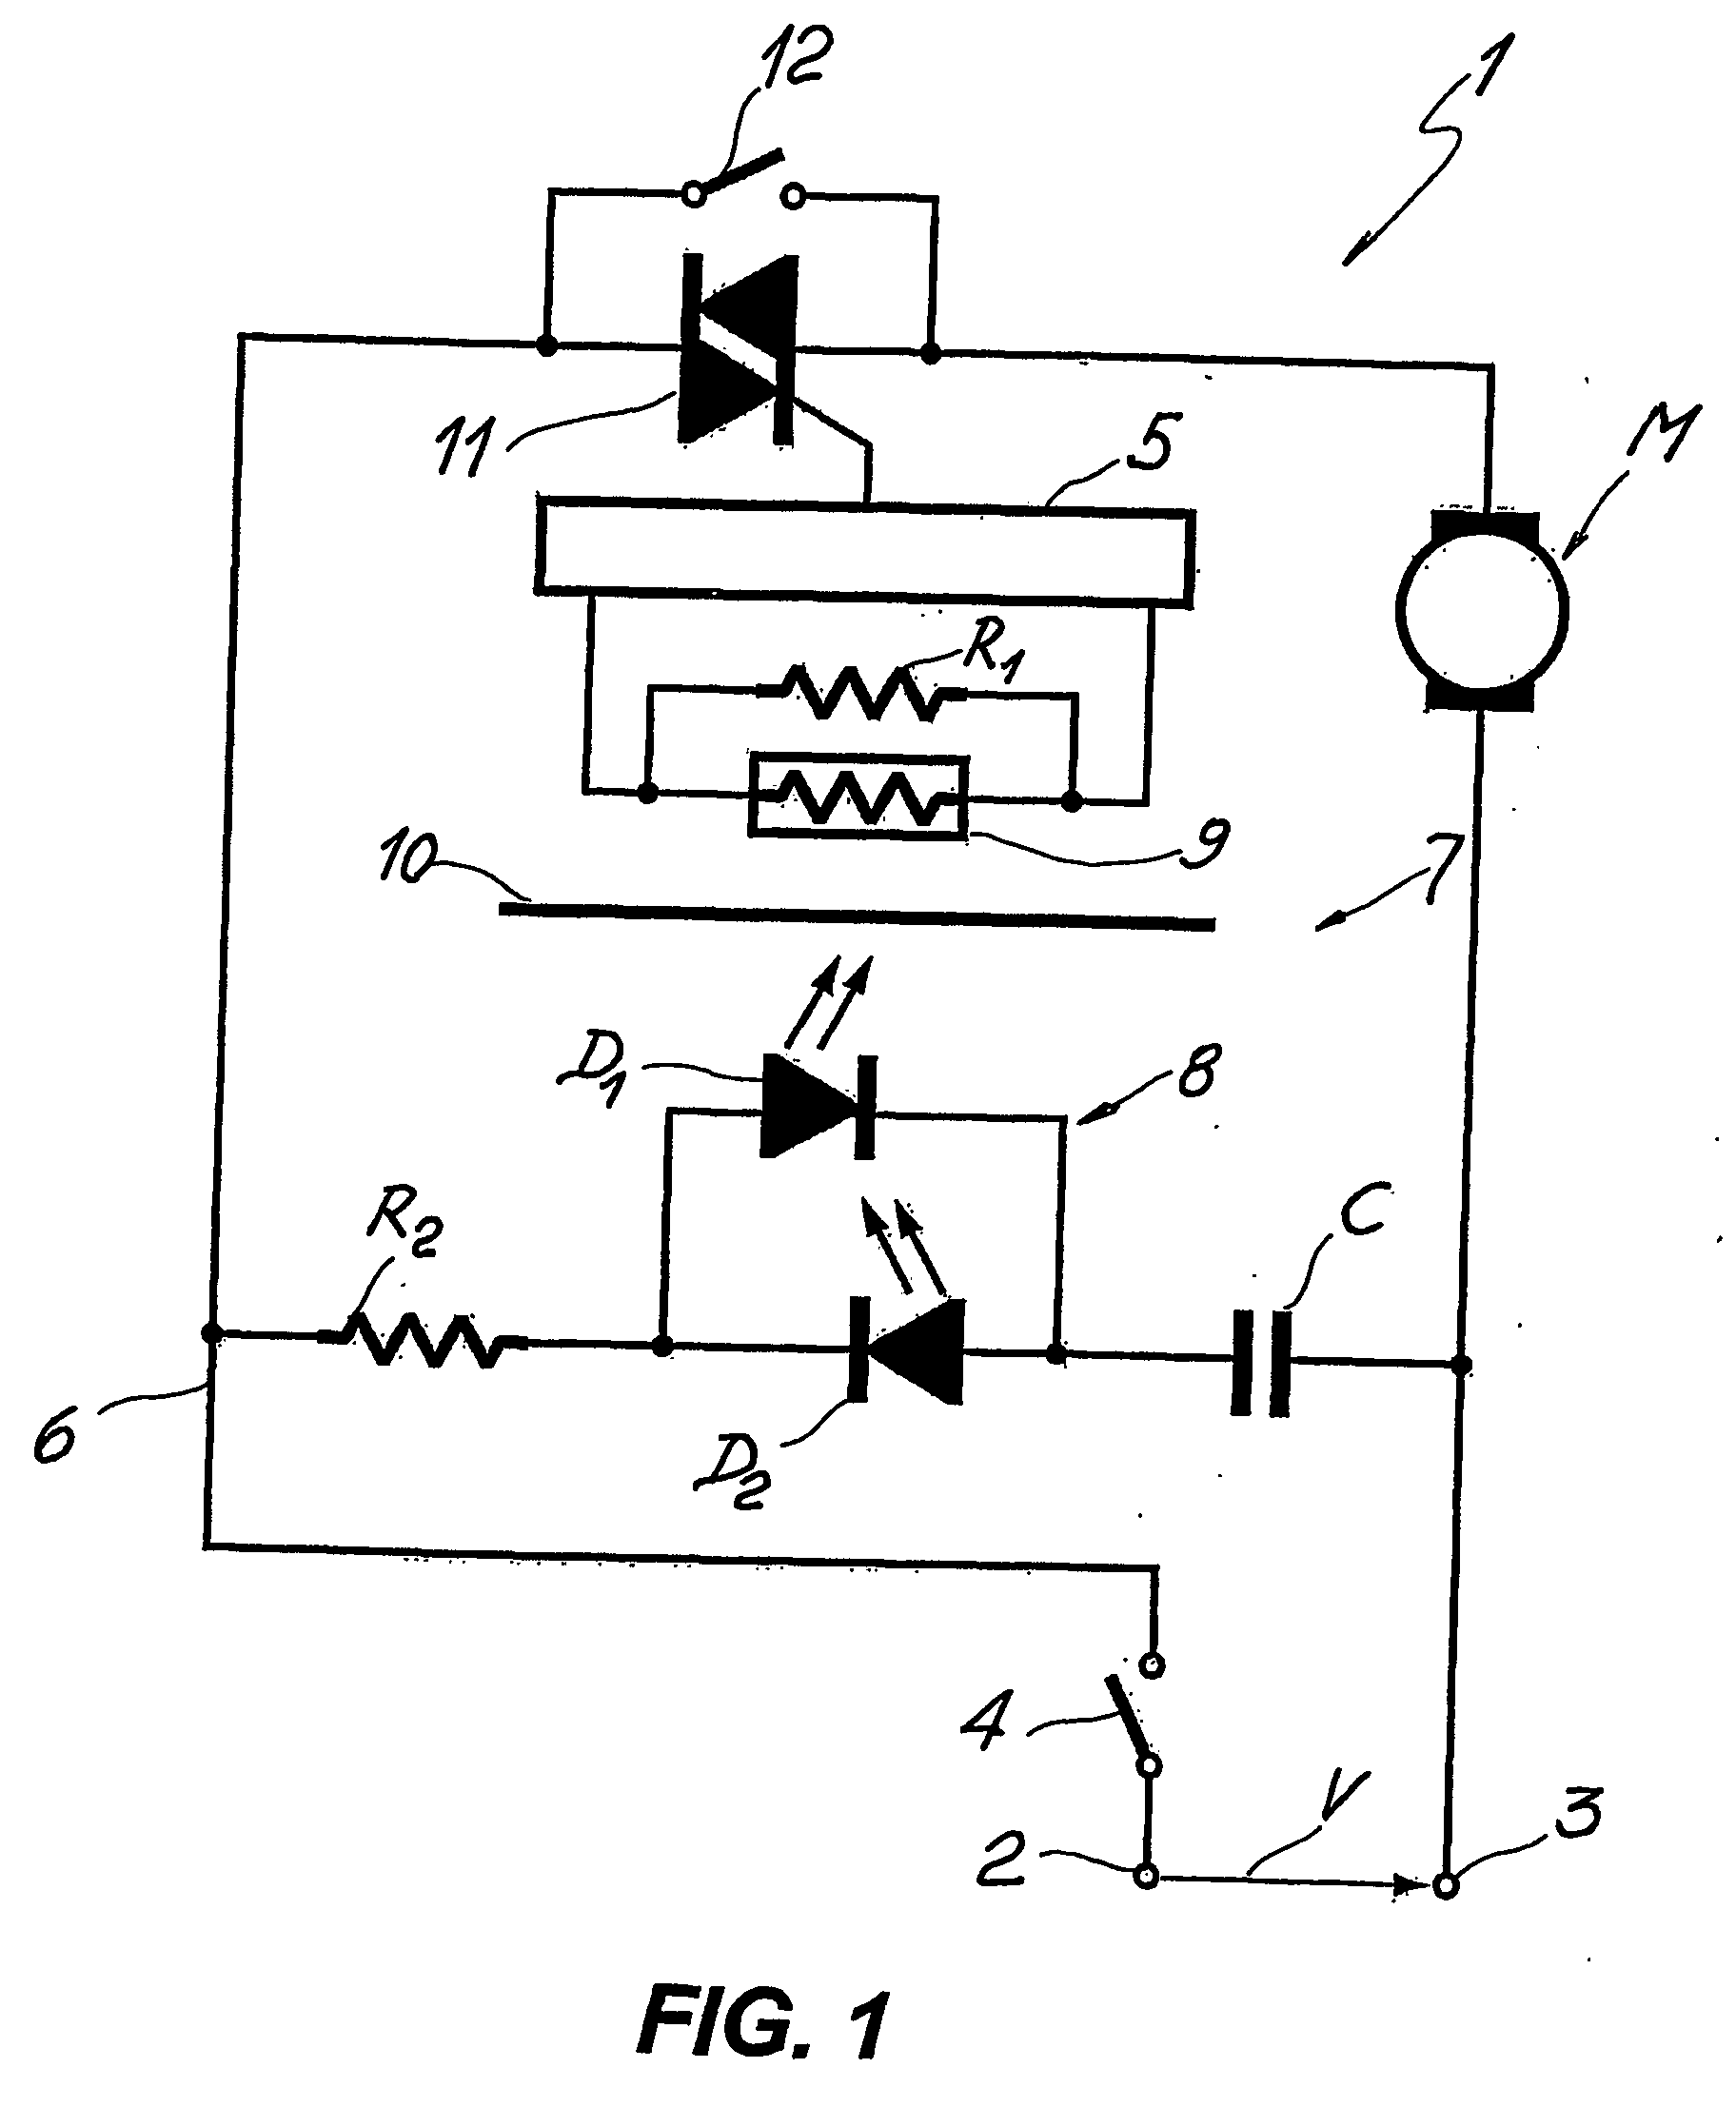 Control device for variable speed electric motors, particularly for power tools